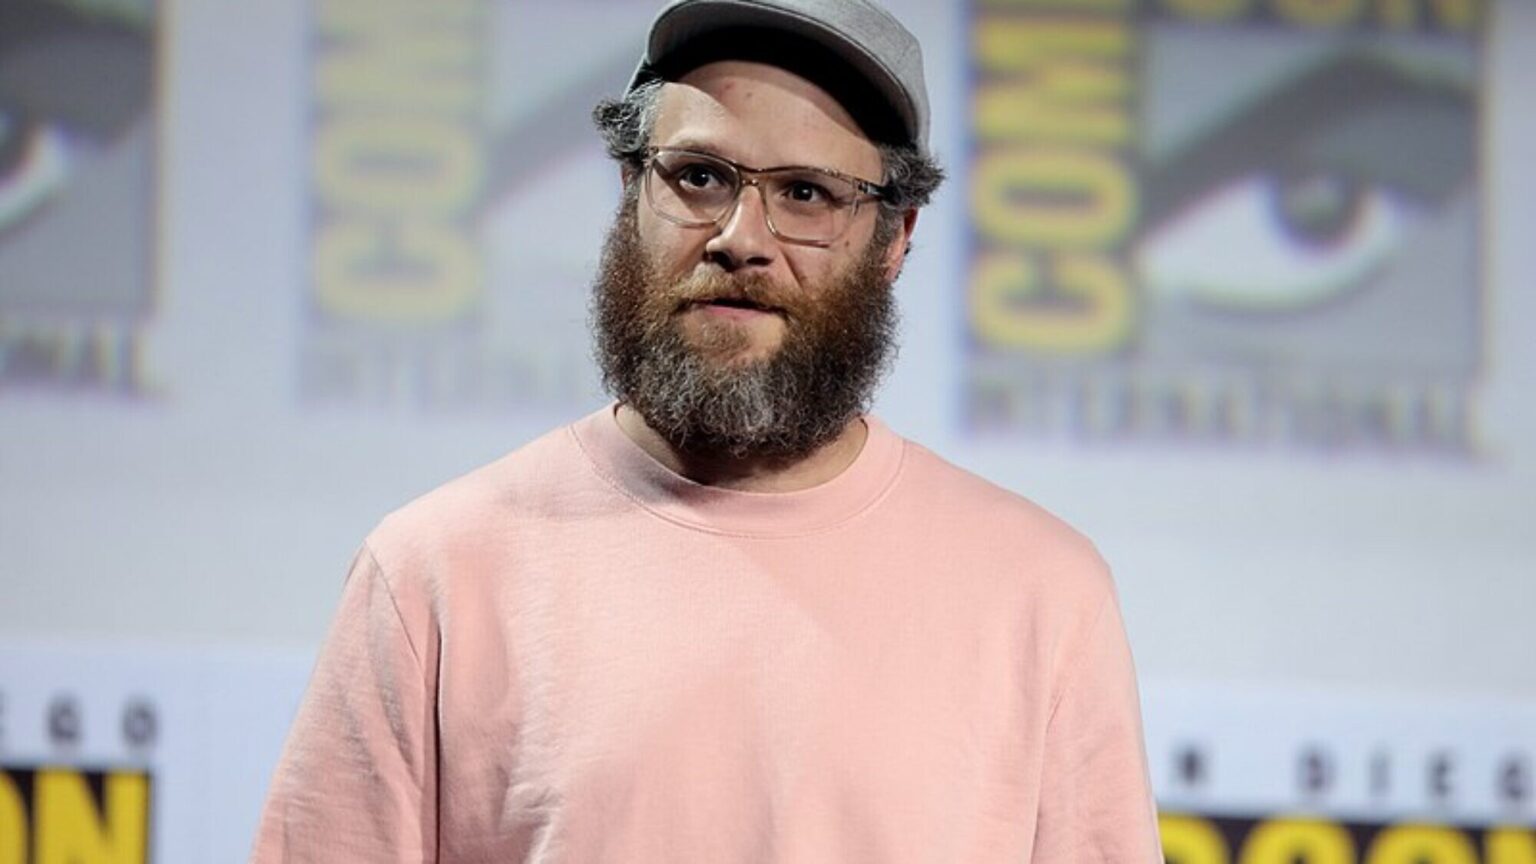 Seth Rogen has found a way to turn his pleasure into business, and let's just say it's getting rolled out in the U.S. next week! Goodbye, movies... for now.